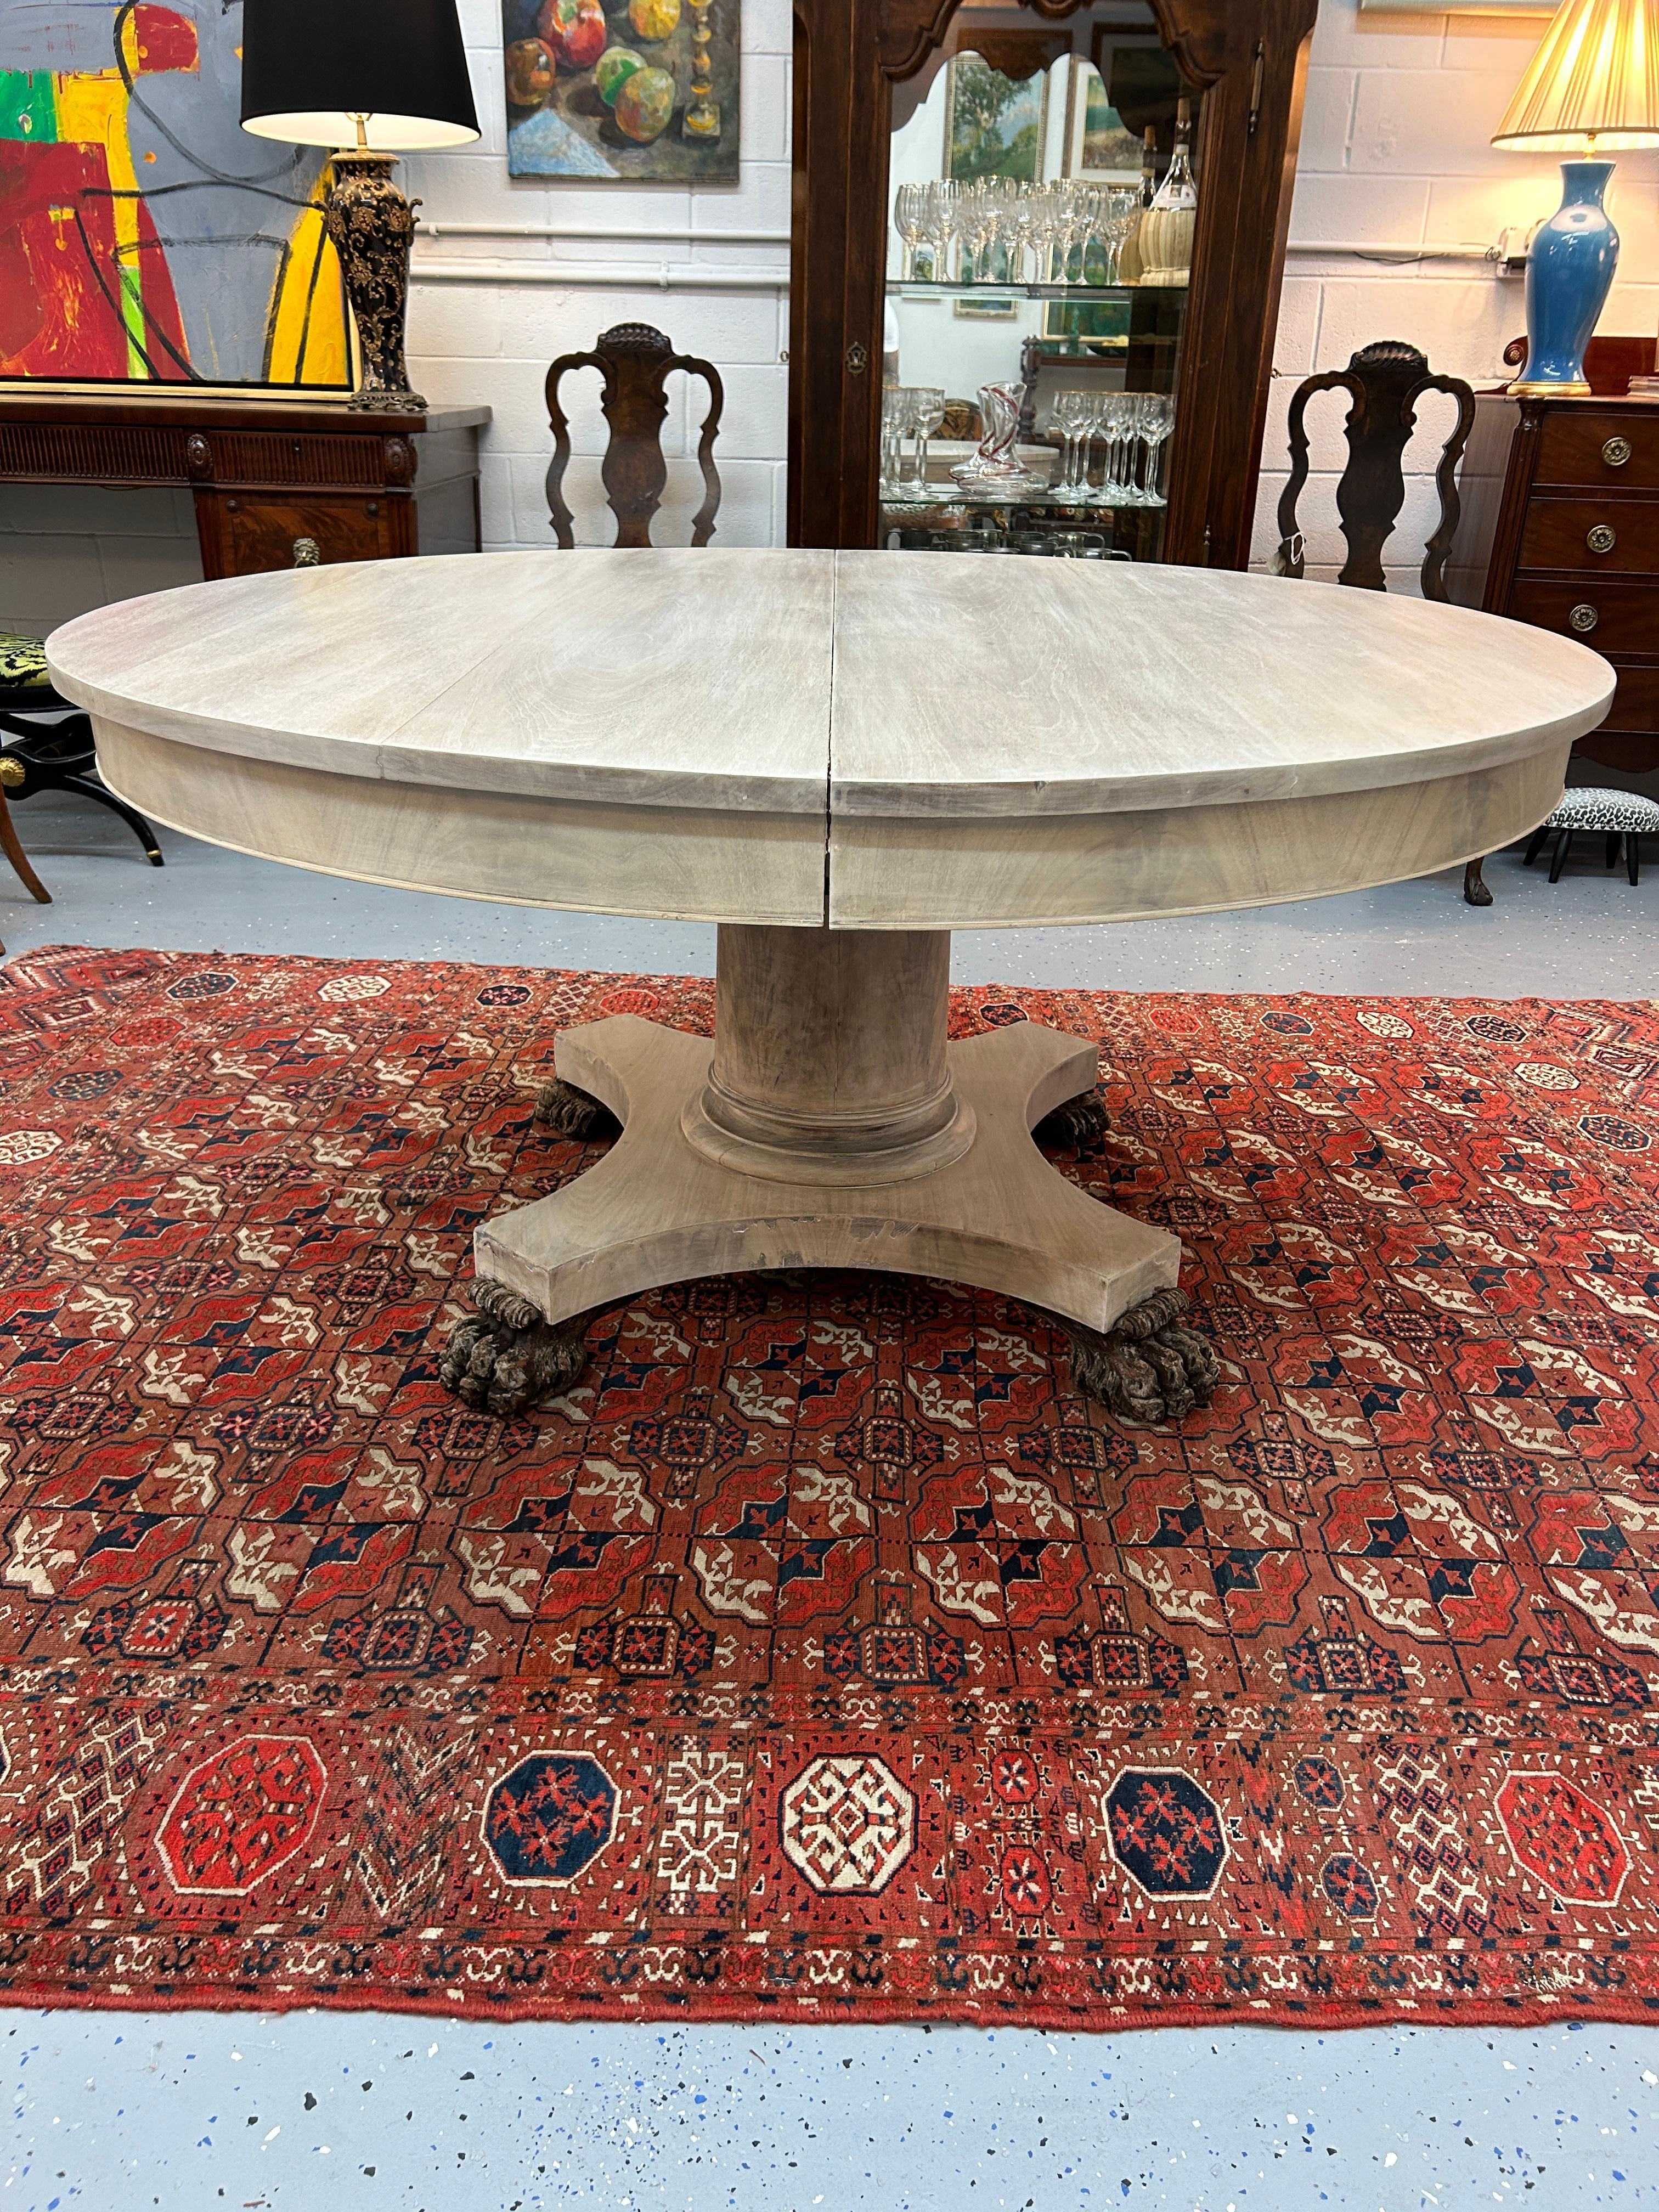  Timeless Elegance Meets Vintage Charm: Early 20th Century Classical Mahogany Center Table 🌟

Step into the past and embrace the beauty of a bygone era with our exquisite Early 20th Century Classical Mahogany Center Table. This one-of-a-kind piece